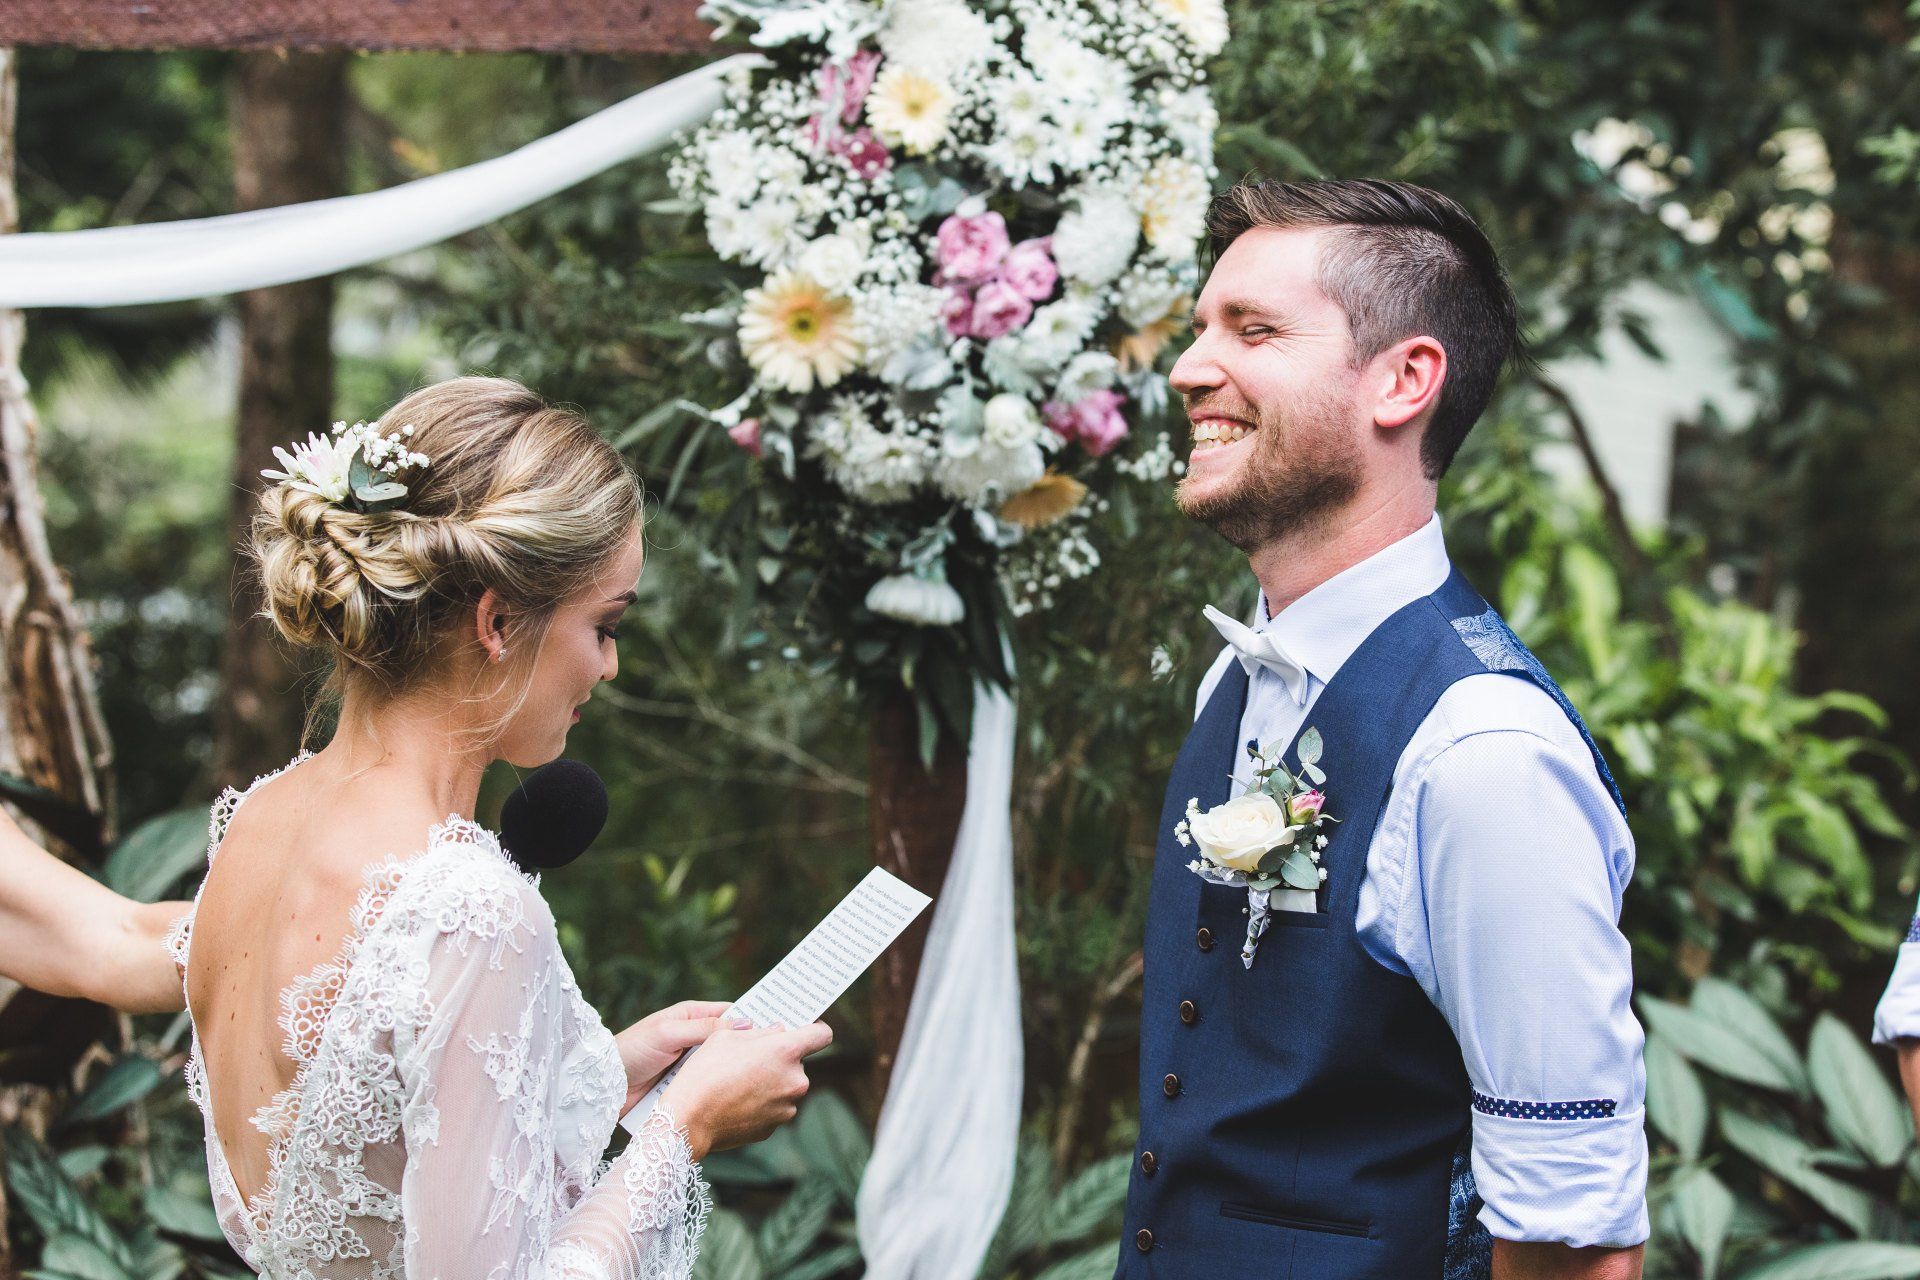 bride with flowers in hair and arbor with pink flowers reading her vows to her grinning husband wearing blue waistcoat